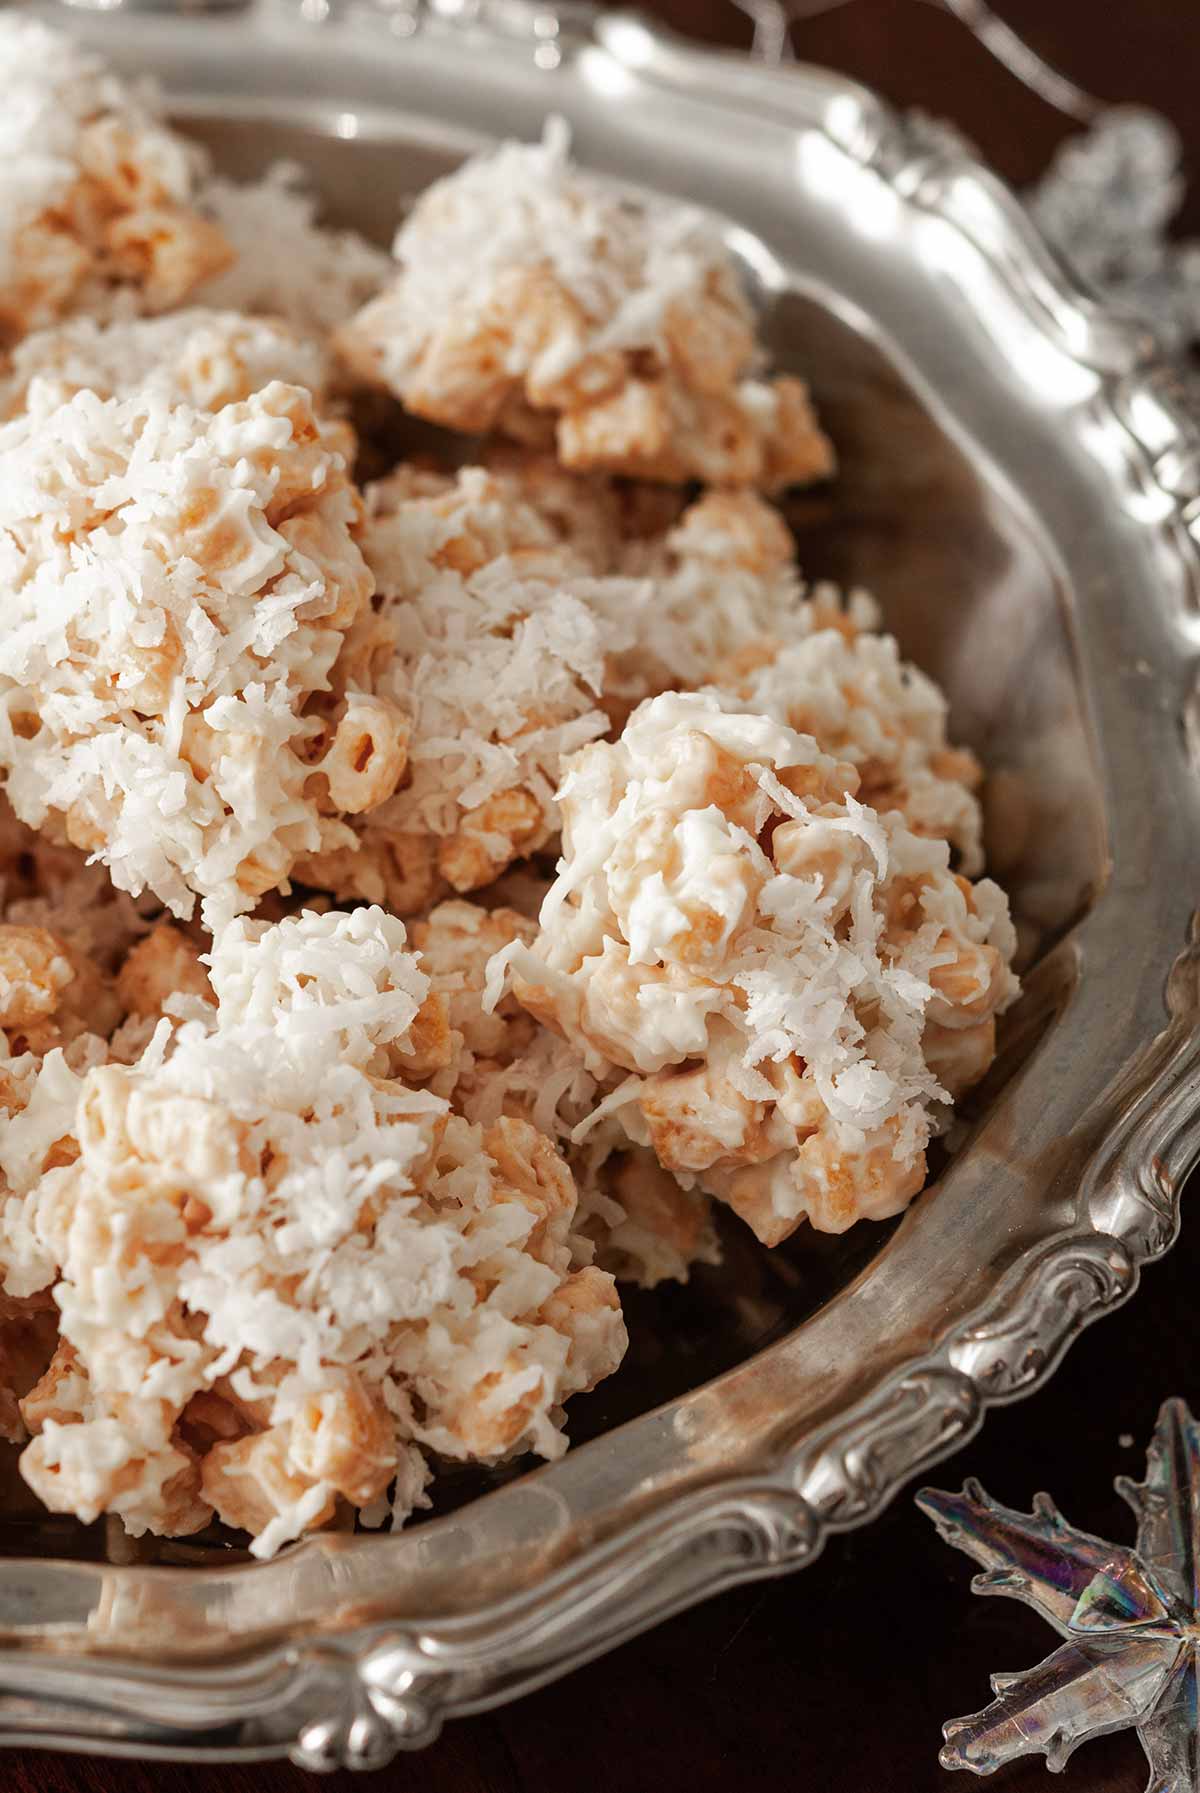 Coconut cookies in a decorative silver bowl.